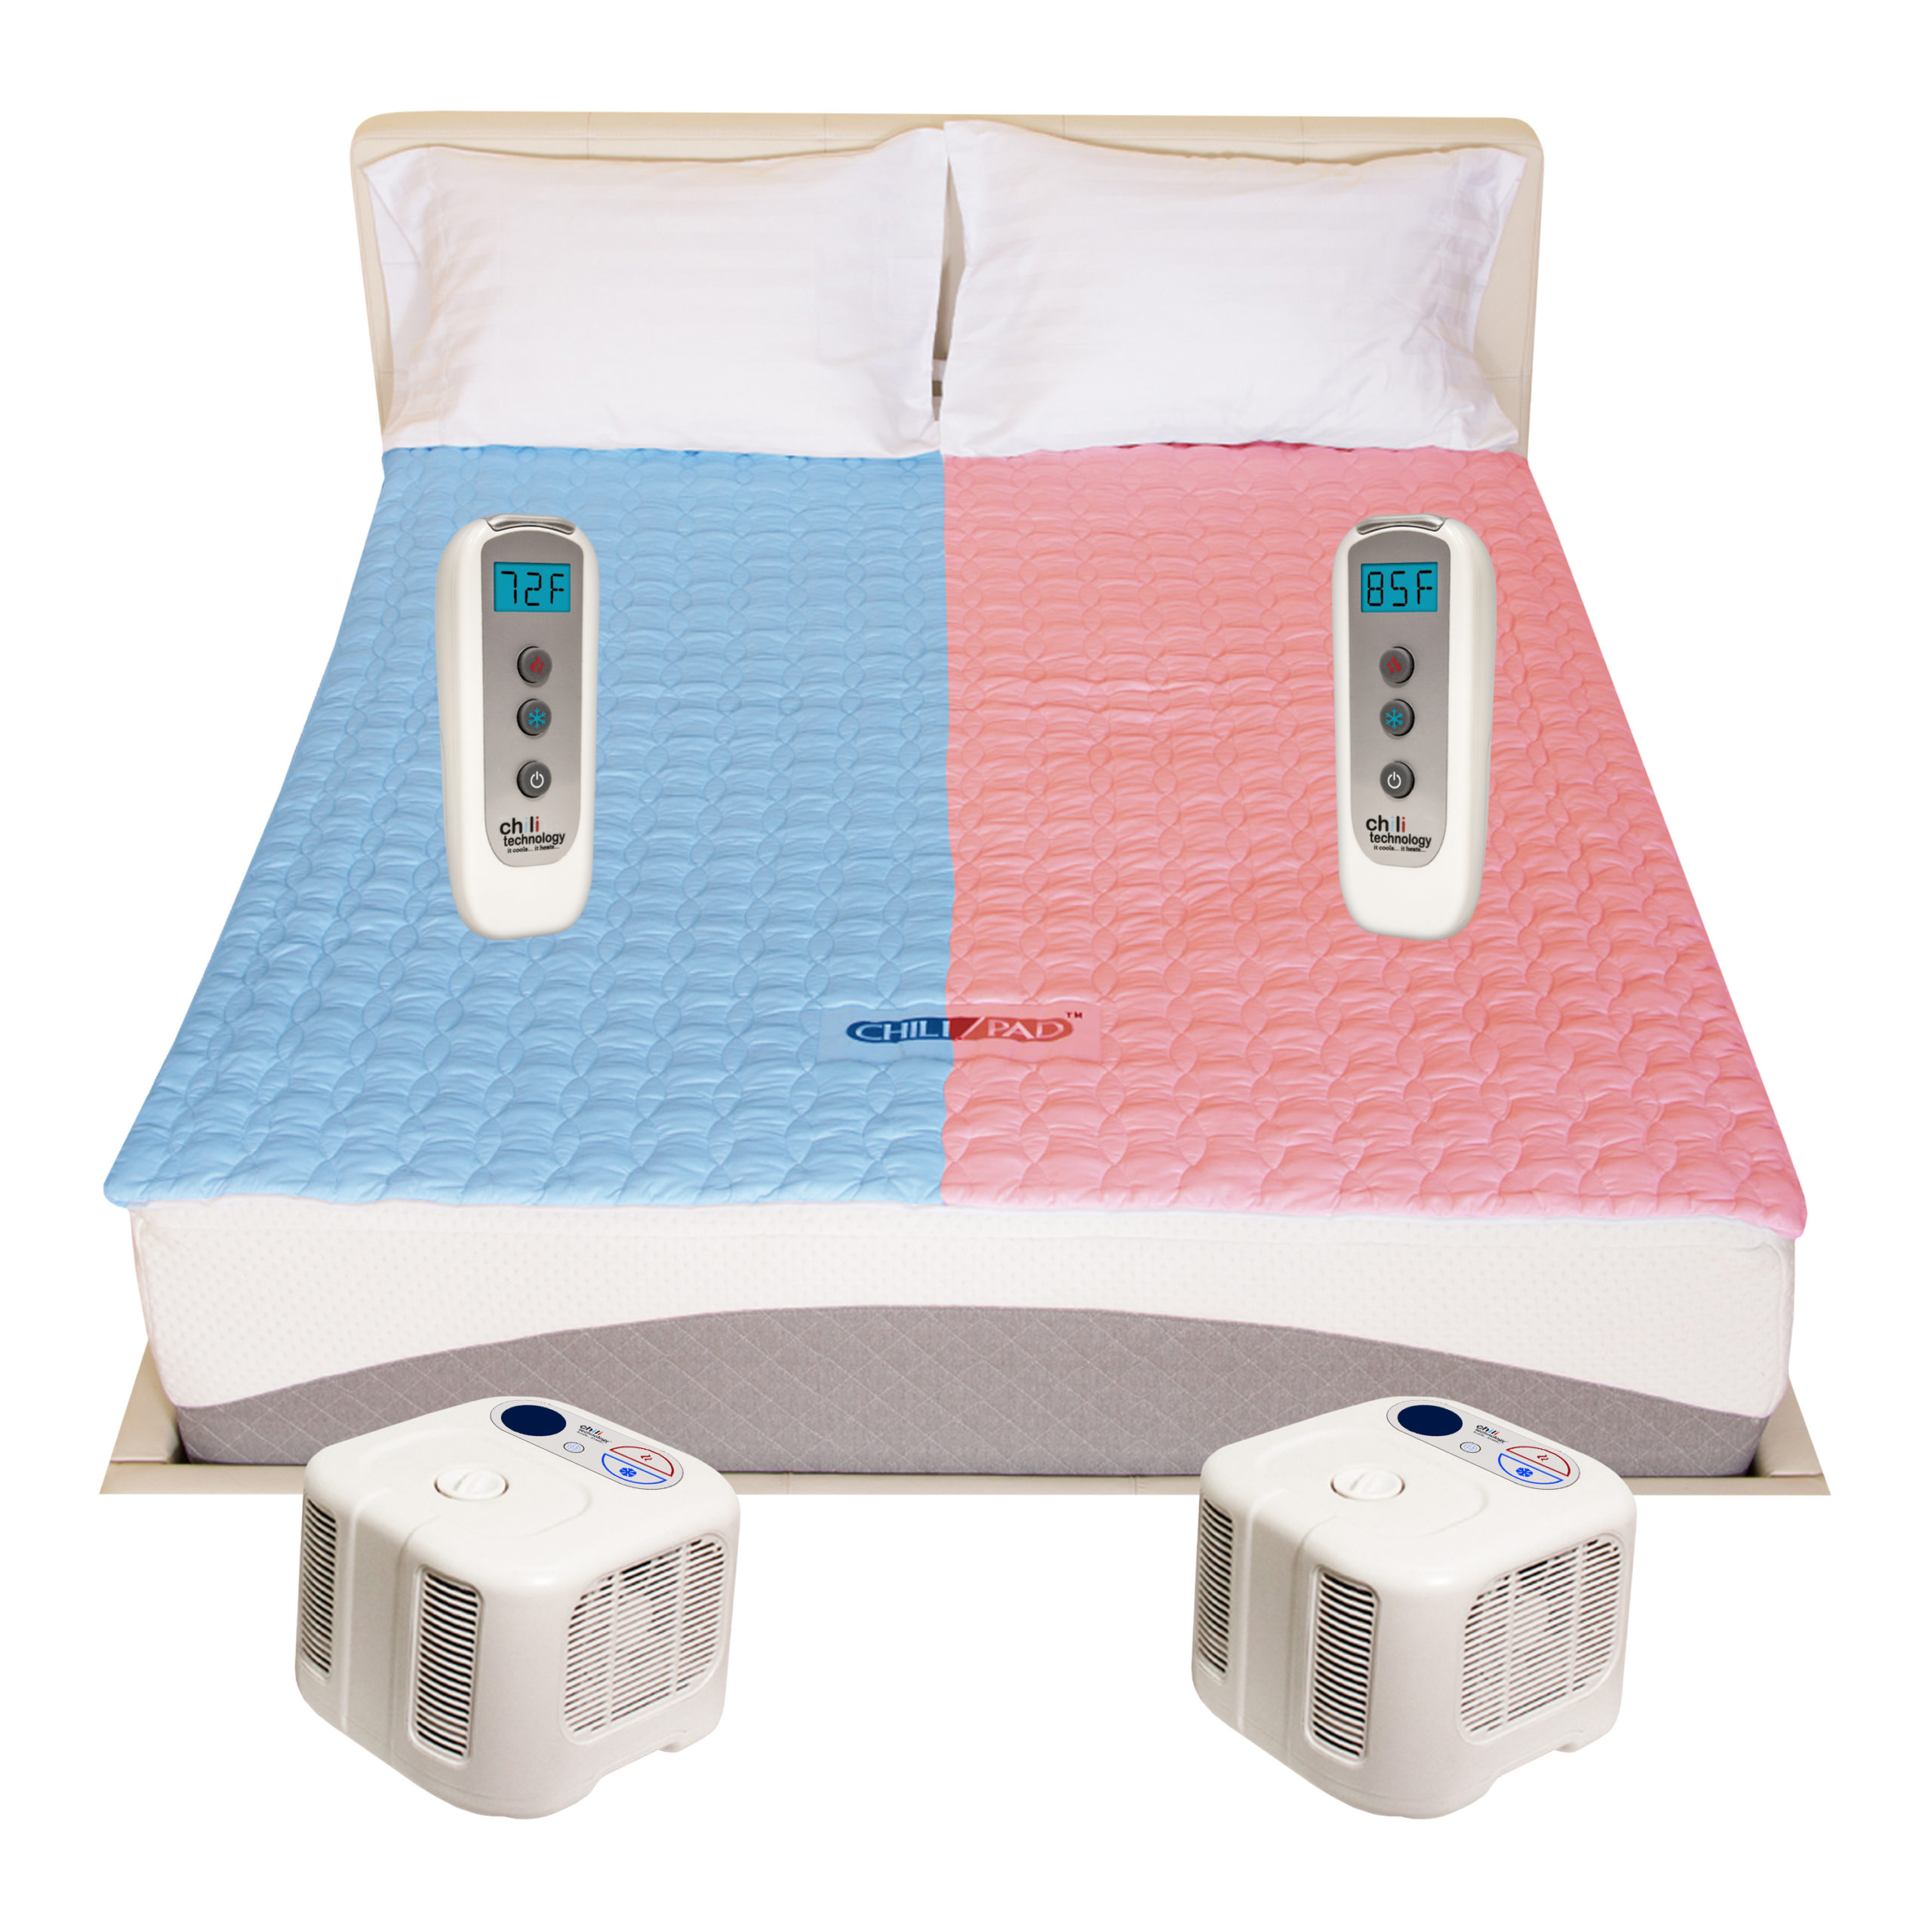 Does Sleeping Lose Weight - Chilipad|Temperature|Mattress|Cube|Sleep|Bed|Water|System|Pad|Ooler|Control|Unit|Night|Bedjet|Technology|Side|Air|Product|Review|Body|Time|Degrees|Noise|Price|Pod|Tubes|Heat|Device|Cooling|Room|King|App|Features|Size|Cover|Sleepers|Sheets|Energy|Warranty|Quality|Mattress Pad|Control Unit|Cube Sleep System|Sleep Pod|Distilled Water|Remote Control|Sleep System|Desired Temperature|Water Tank|Chilipad Cube|Chili Technology|Deep Sleep|Pro Cover|Ooler Sleep System|Hydrogen Peroxide|Cool Mesh|Sleep Temperature|Fitted Sheet|Pod Pro|Sleep Quality|Smartphone App|Sleep Systems|Chilipad Sleep System|New Mattress|Sleep Trial|Full Refund|Mattress Topper|Body Heat|Air Flow|Chilipad Review